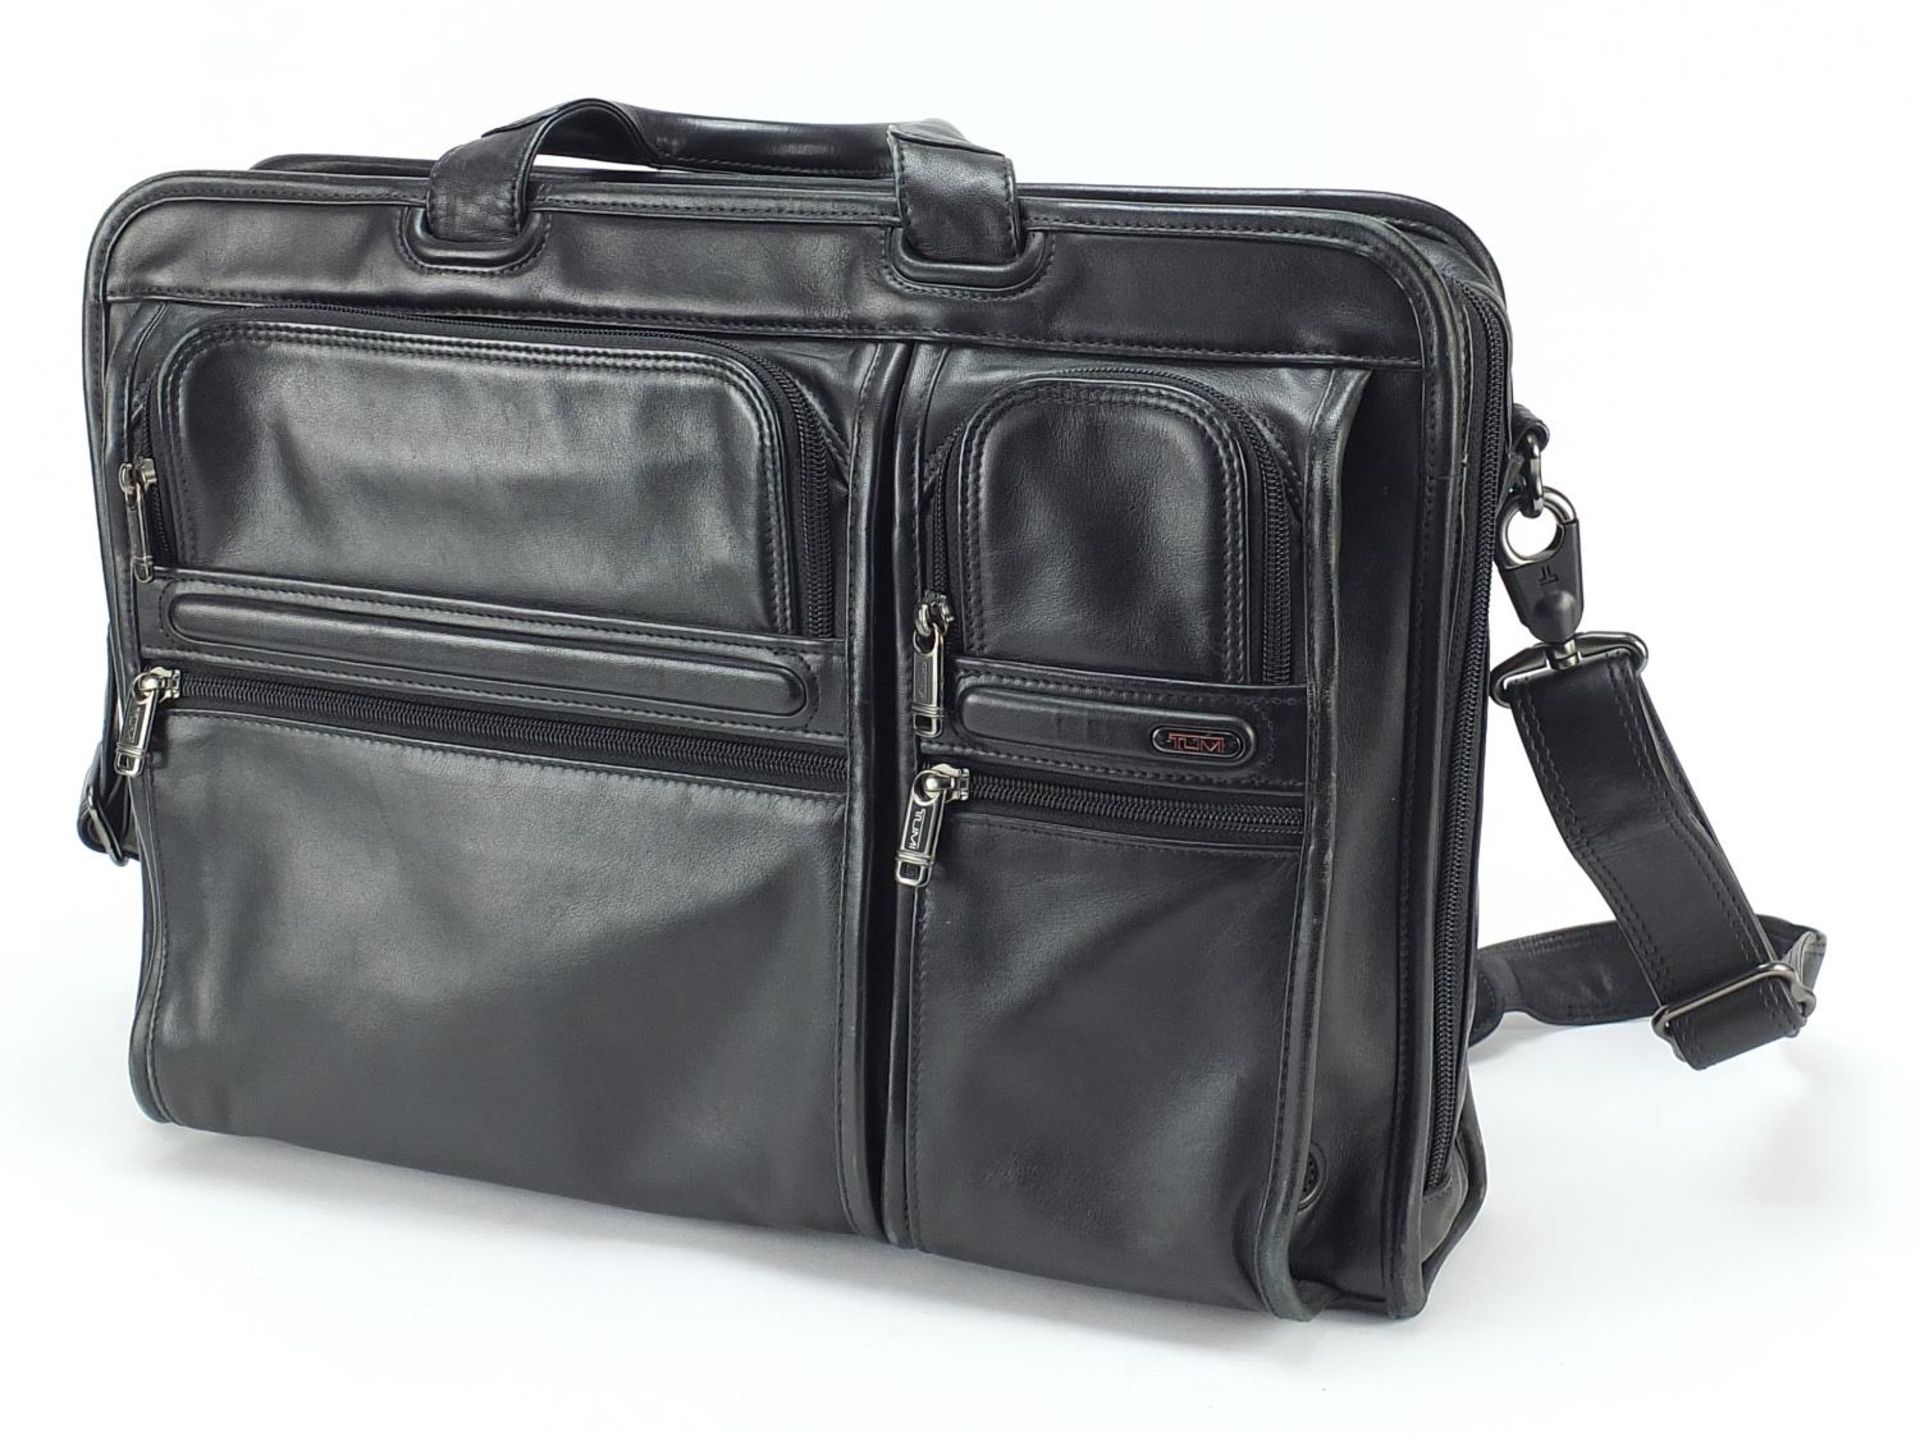 Tumi leather laptop briefcase, 47cm wide - Image 2 of 5